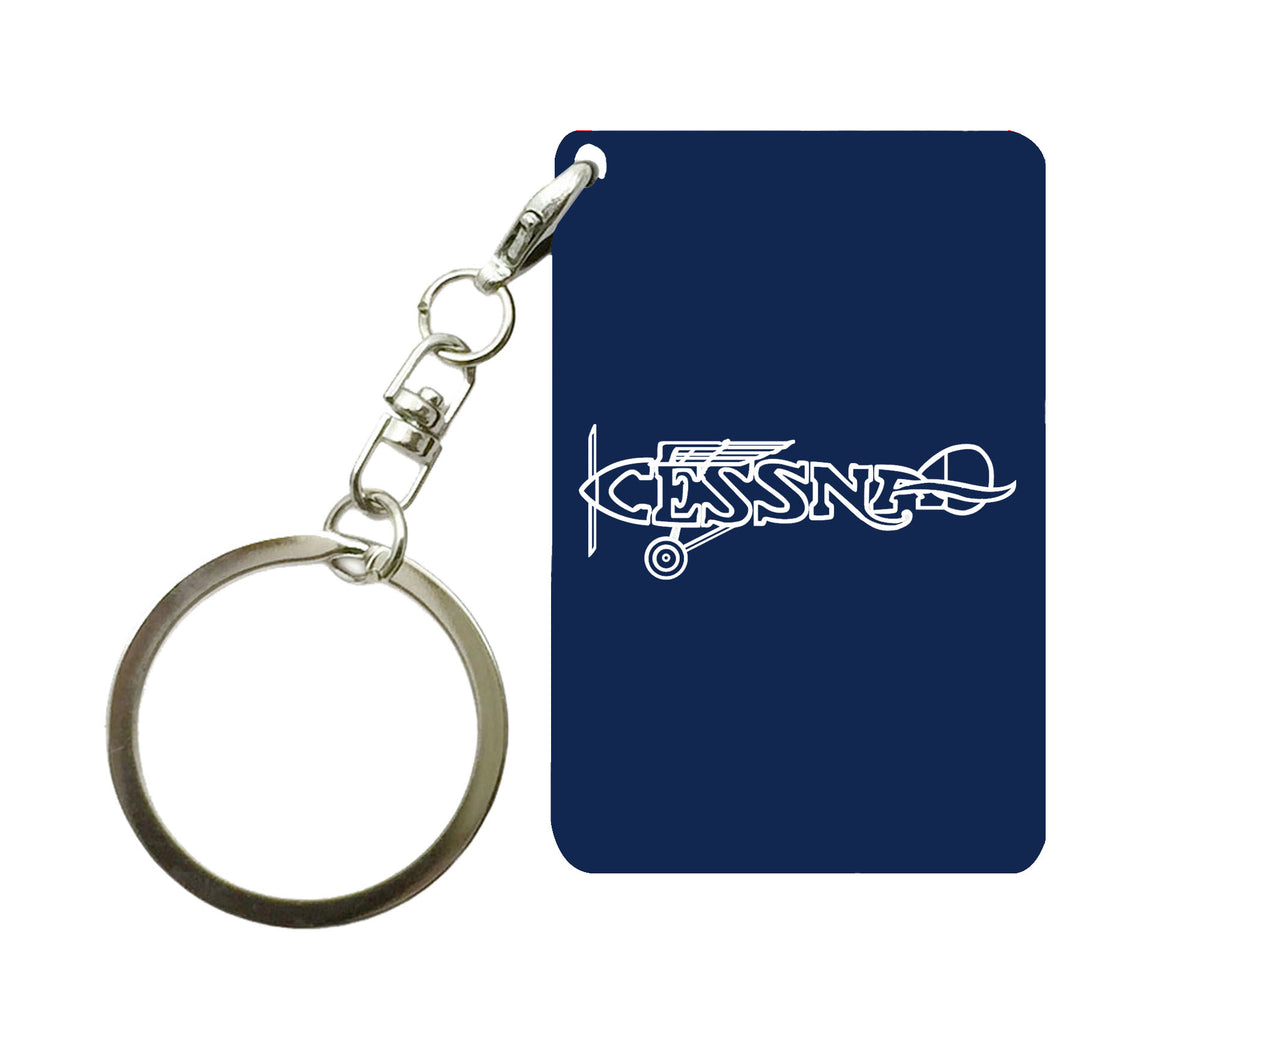 Special Cessna Text Designed Key Chains